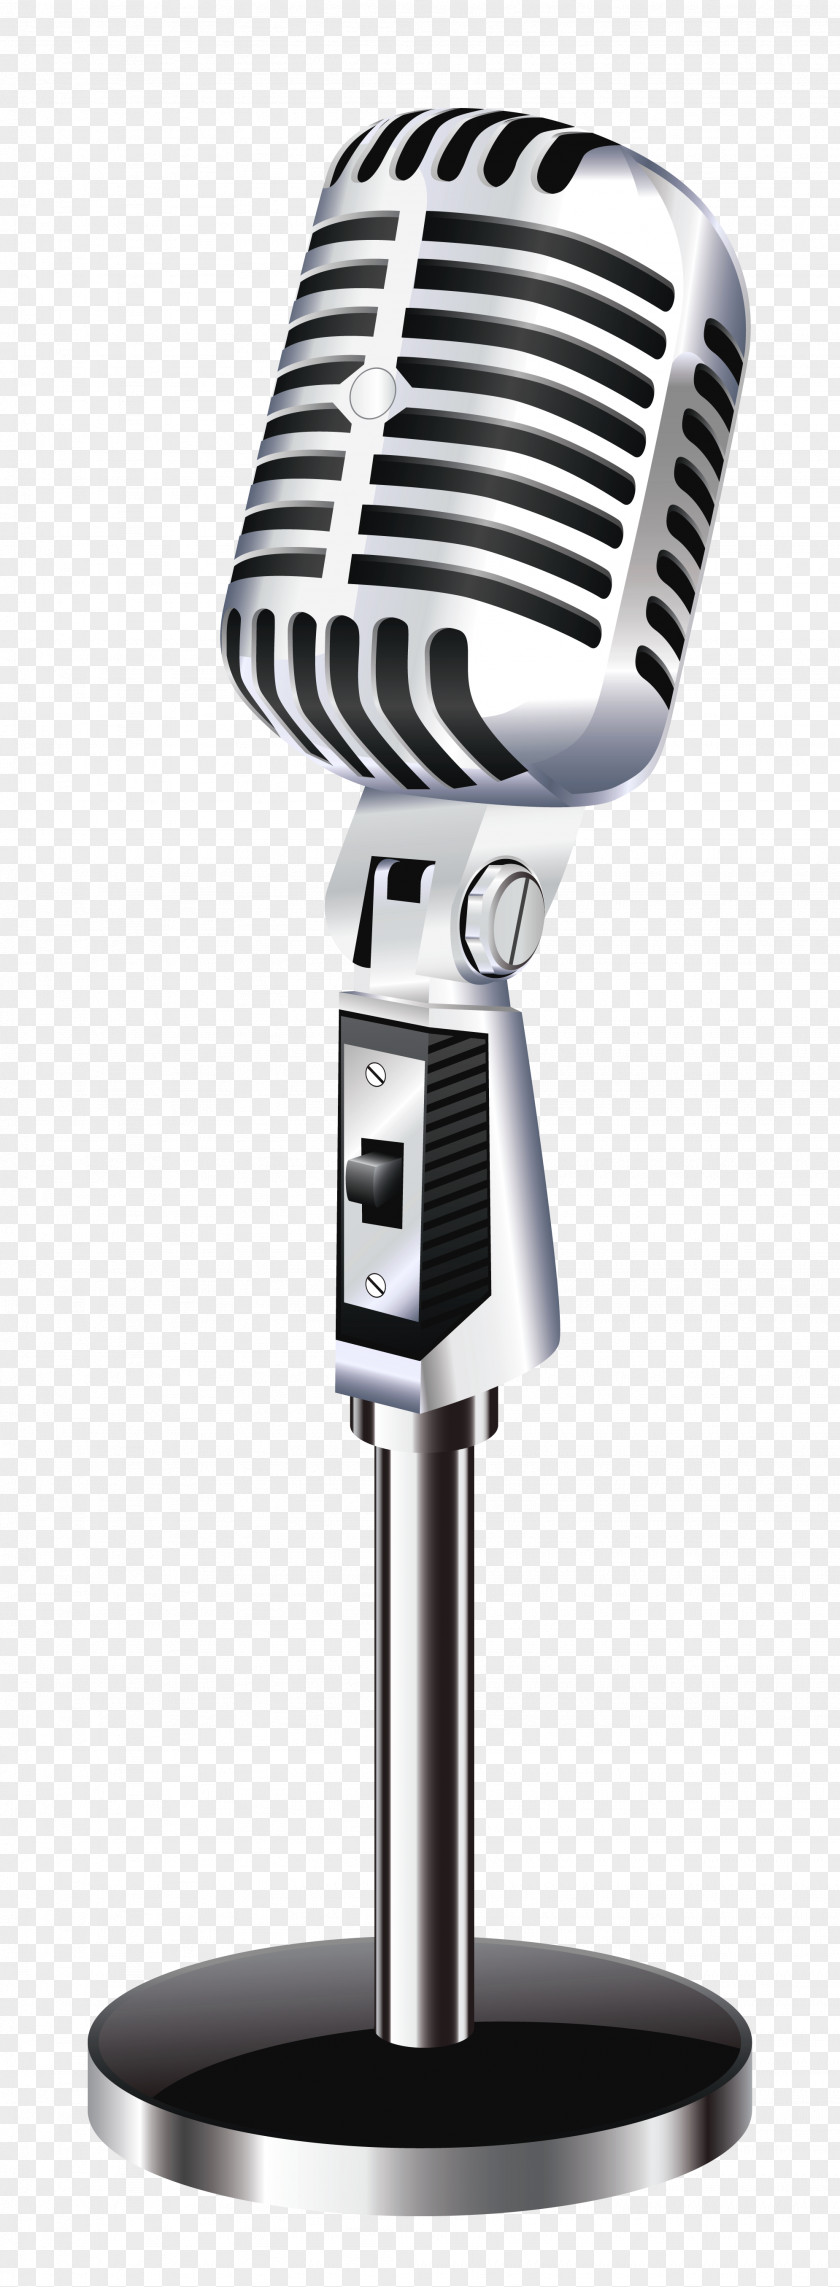 Retro Microphone Clipart Picture PNG